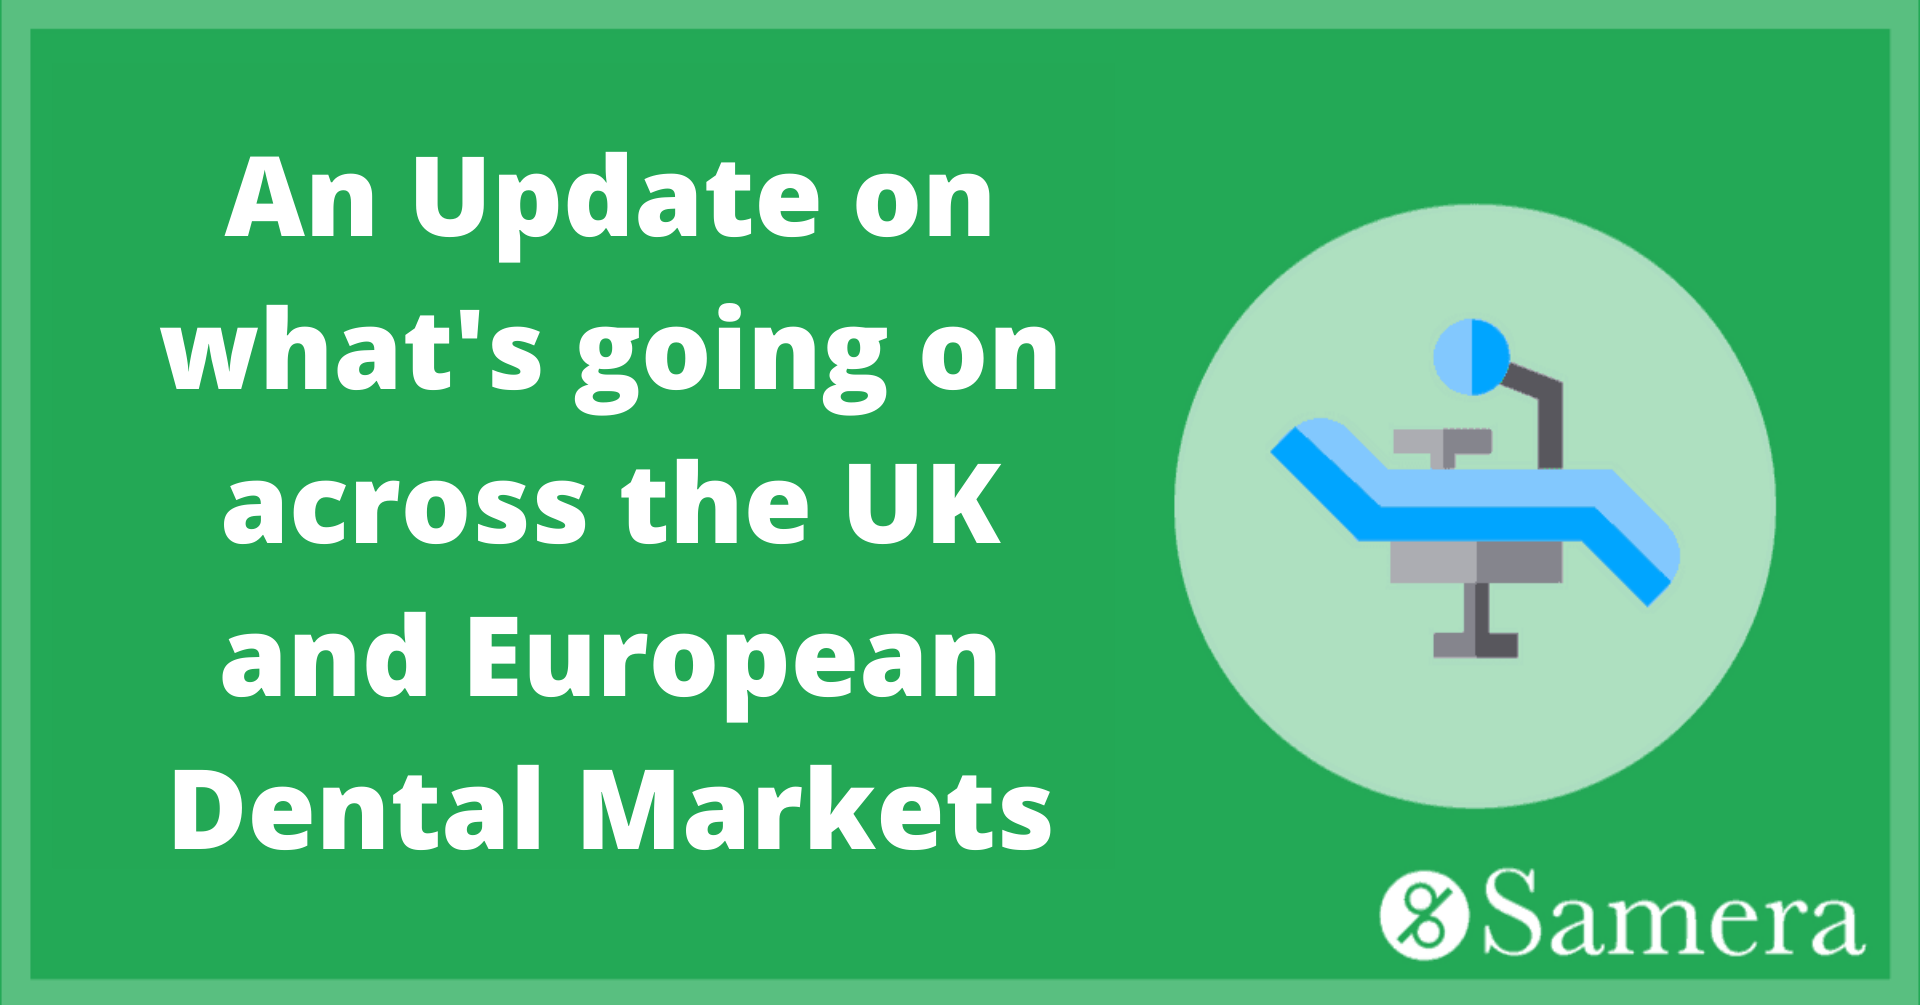 An Update on what’s going on across the UK and European Dental Markets